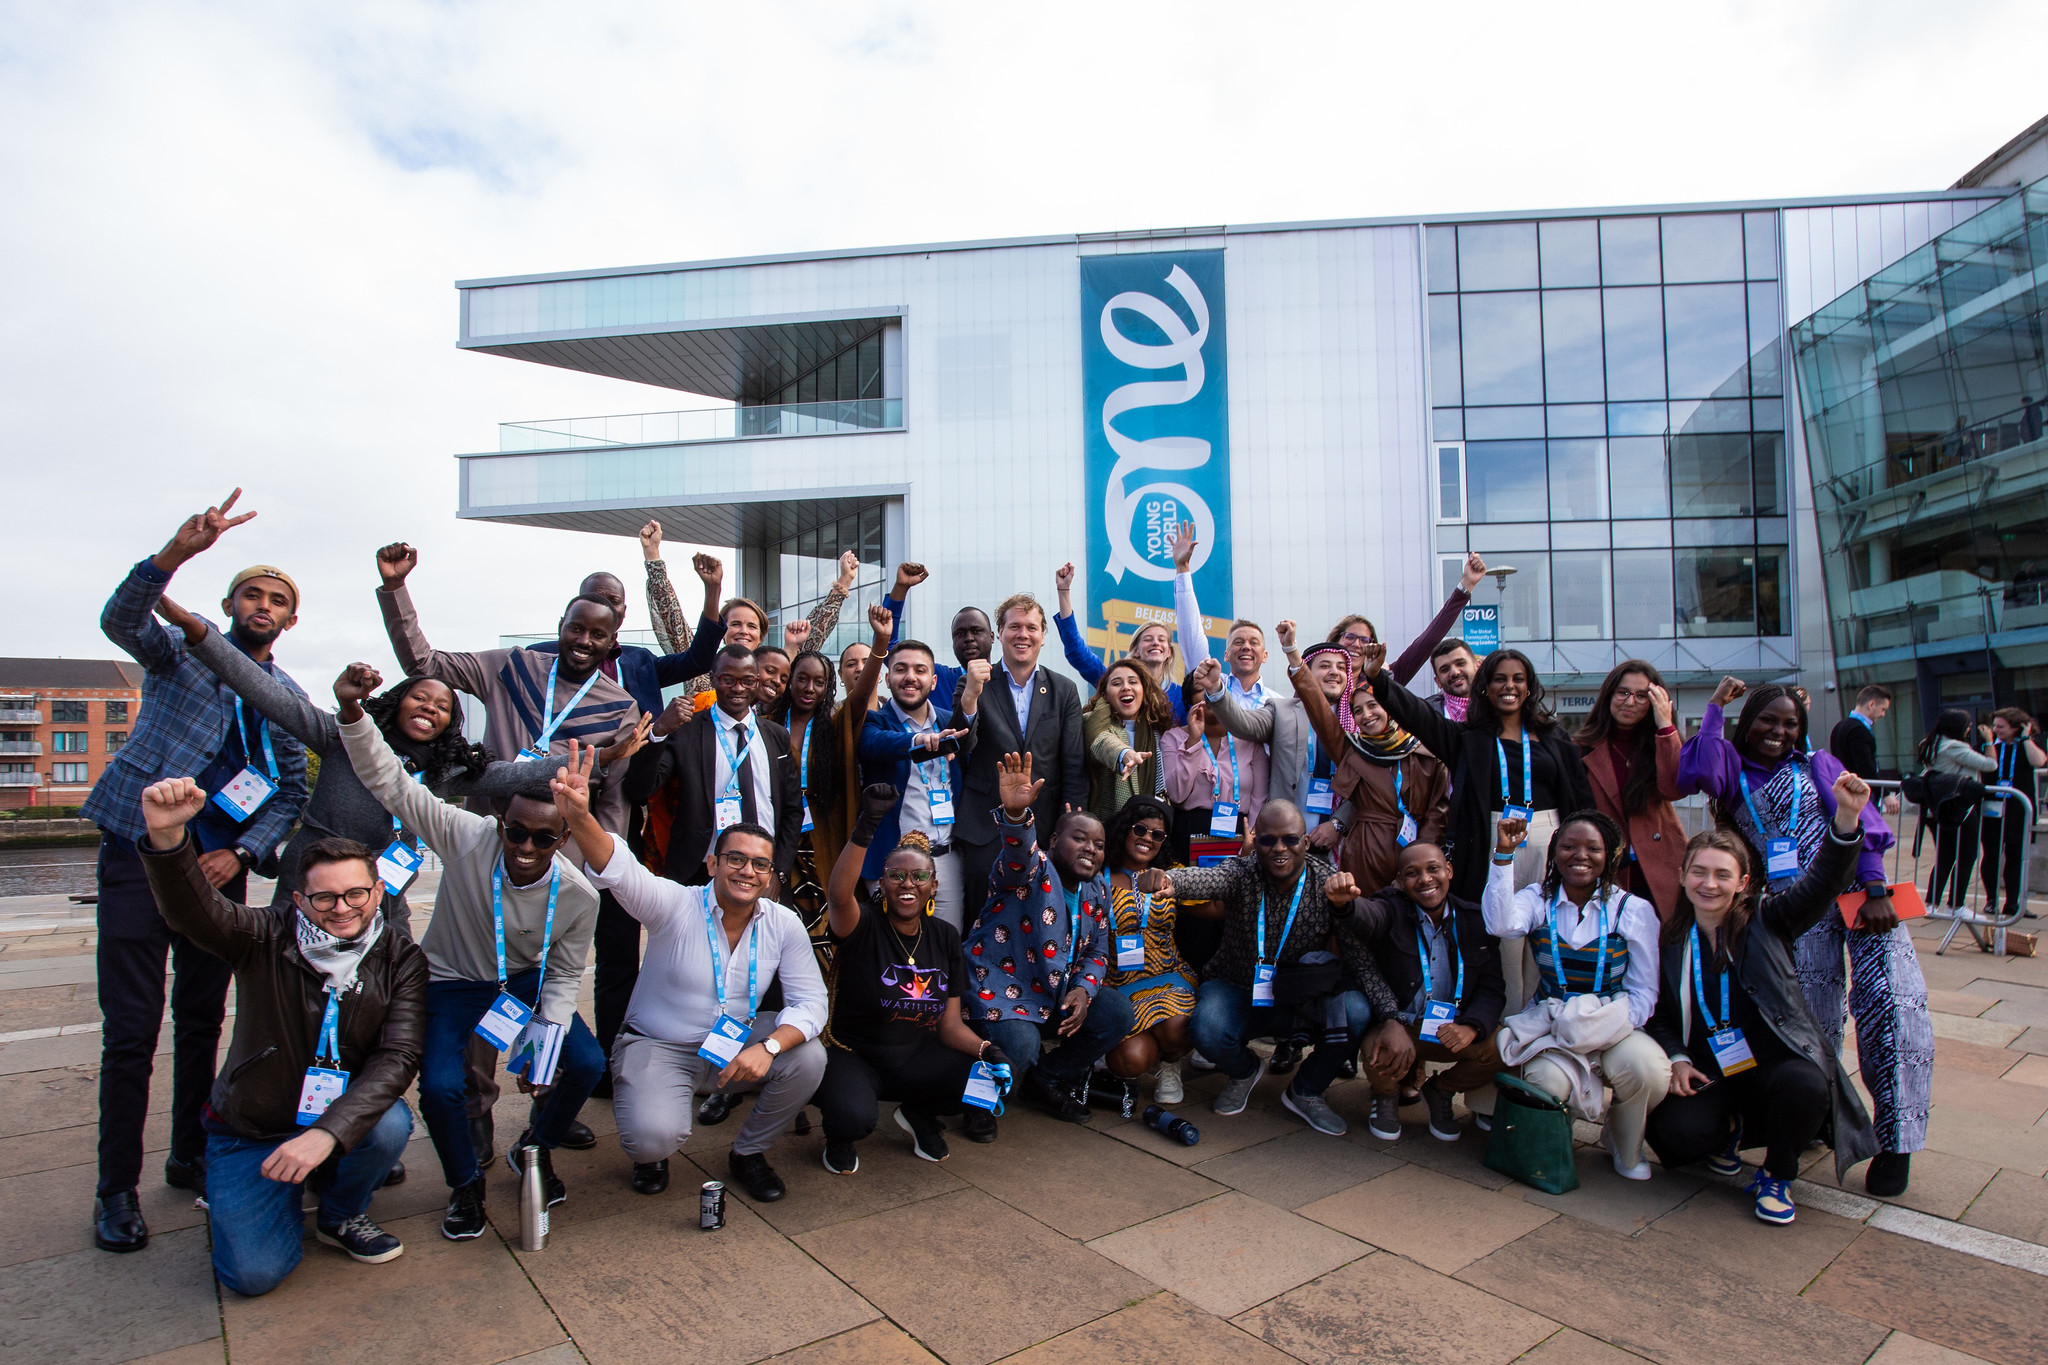 Group photo of One Young World attendees waving and smiling outside the Belfast International Convention Centre